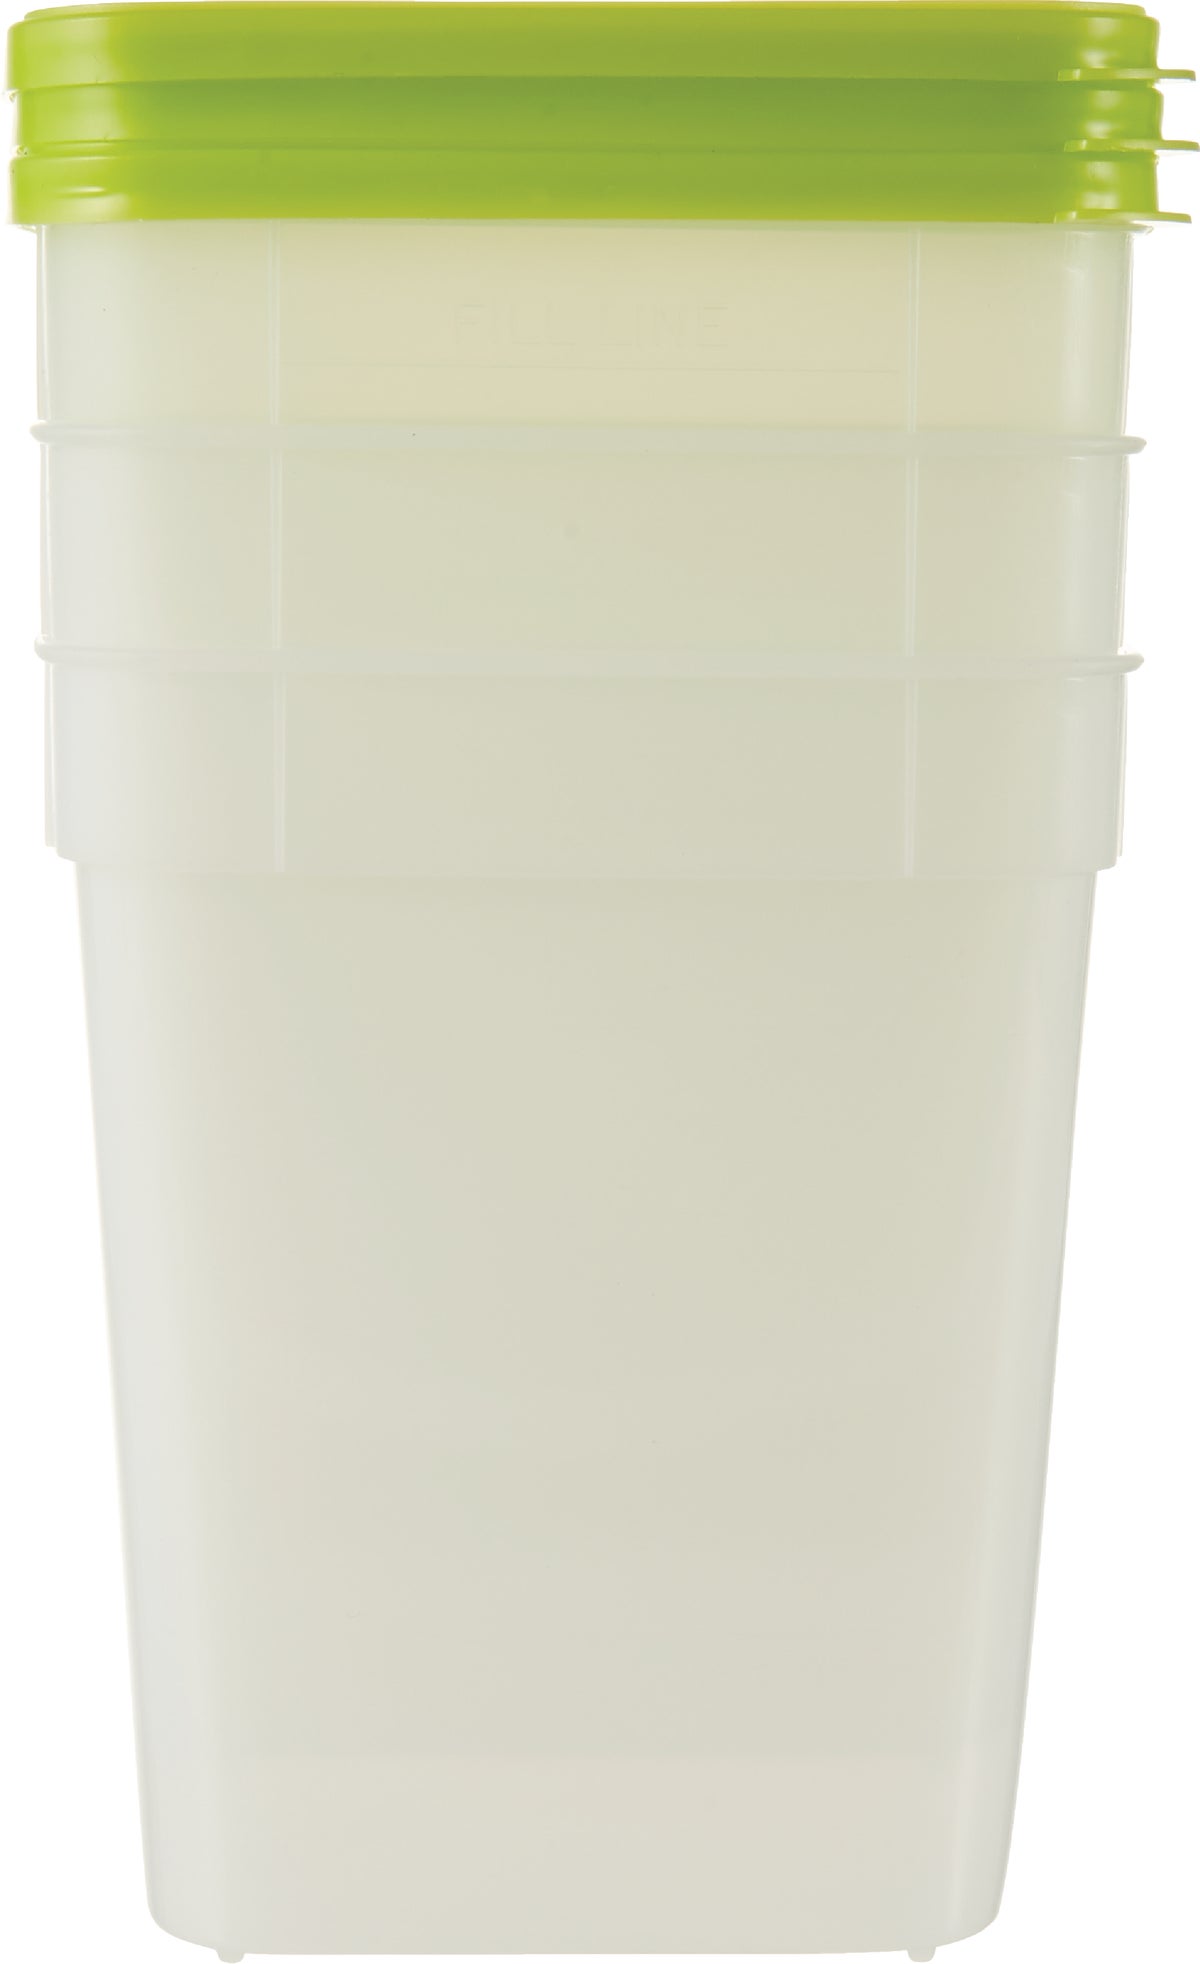 Arrow Home Products 1.5 pt Stor-Keeper Freezer Storage Containers - 4 pack  - 04305